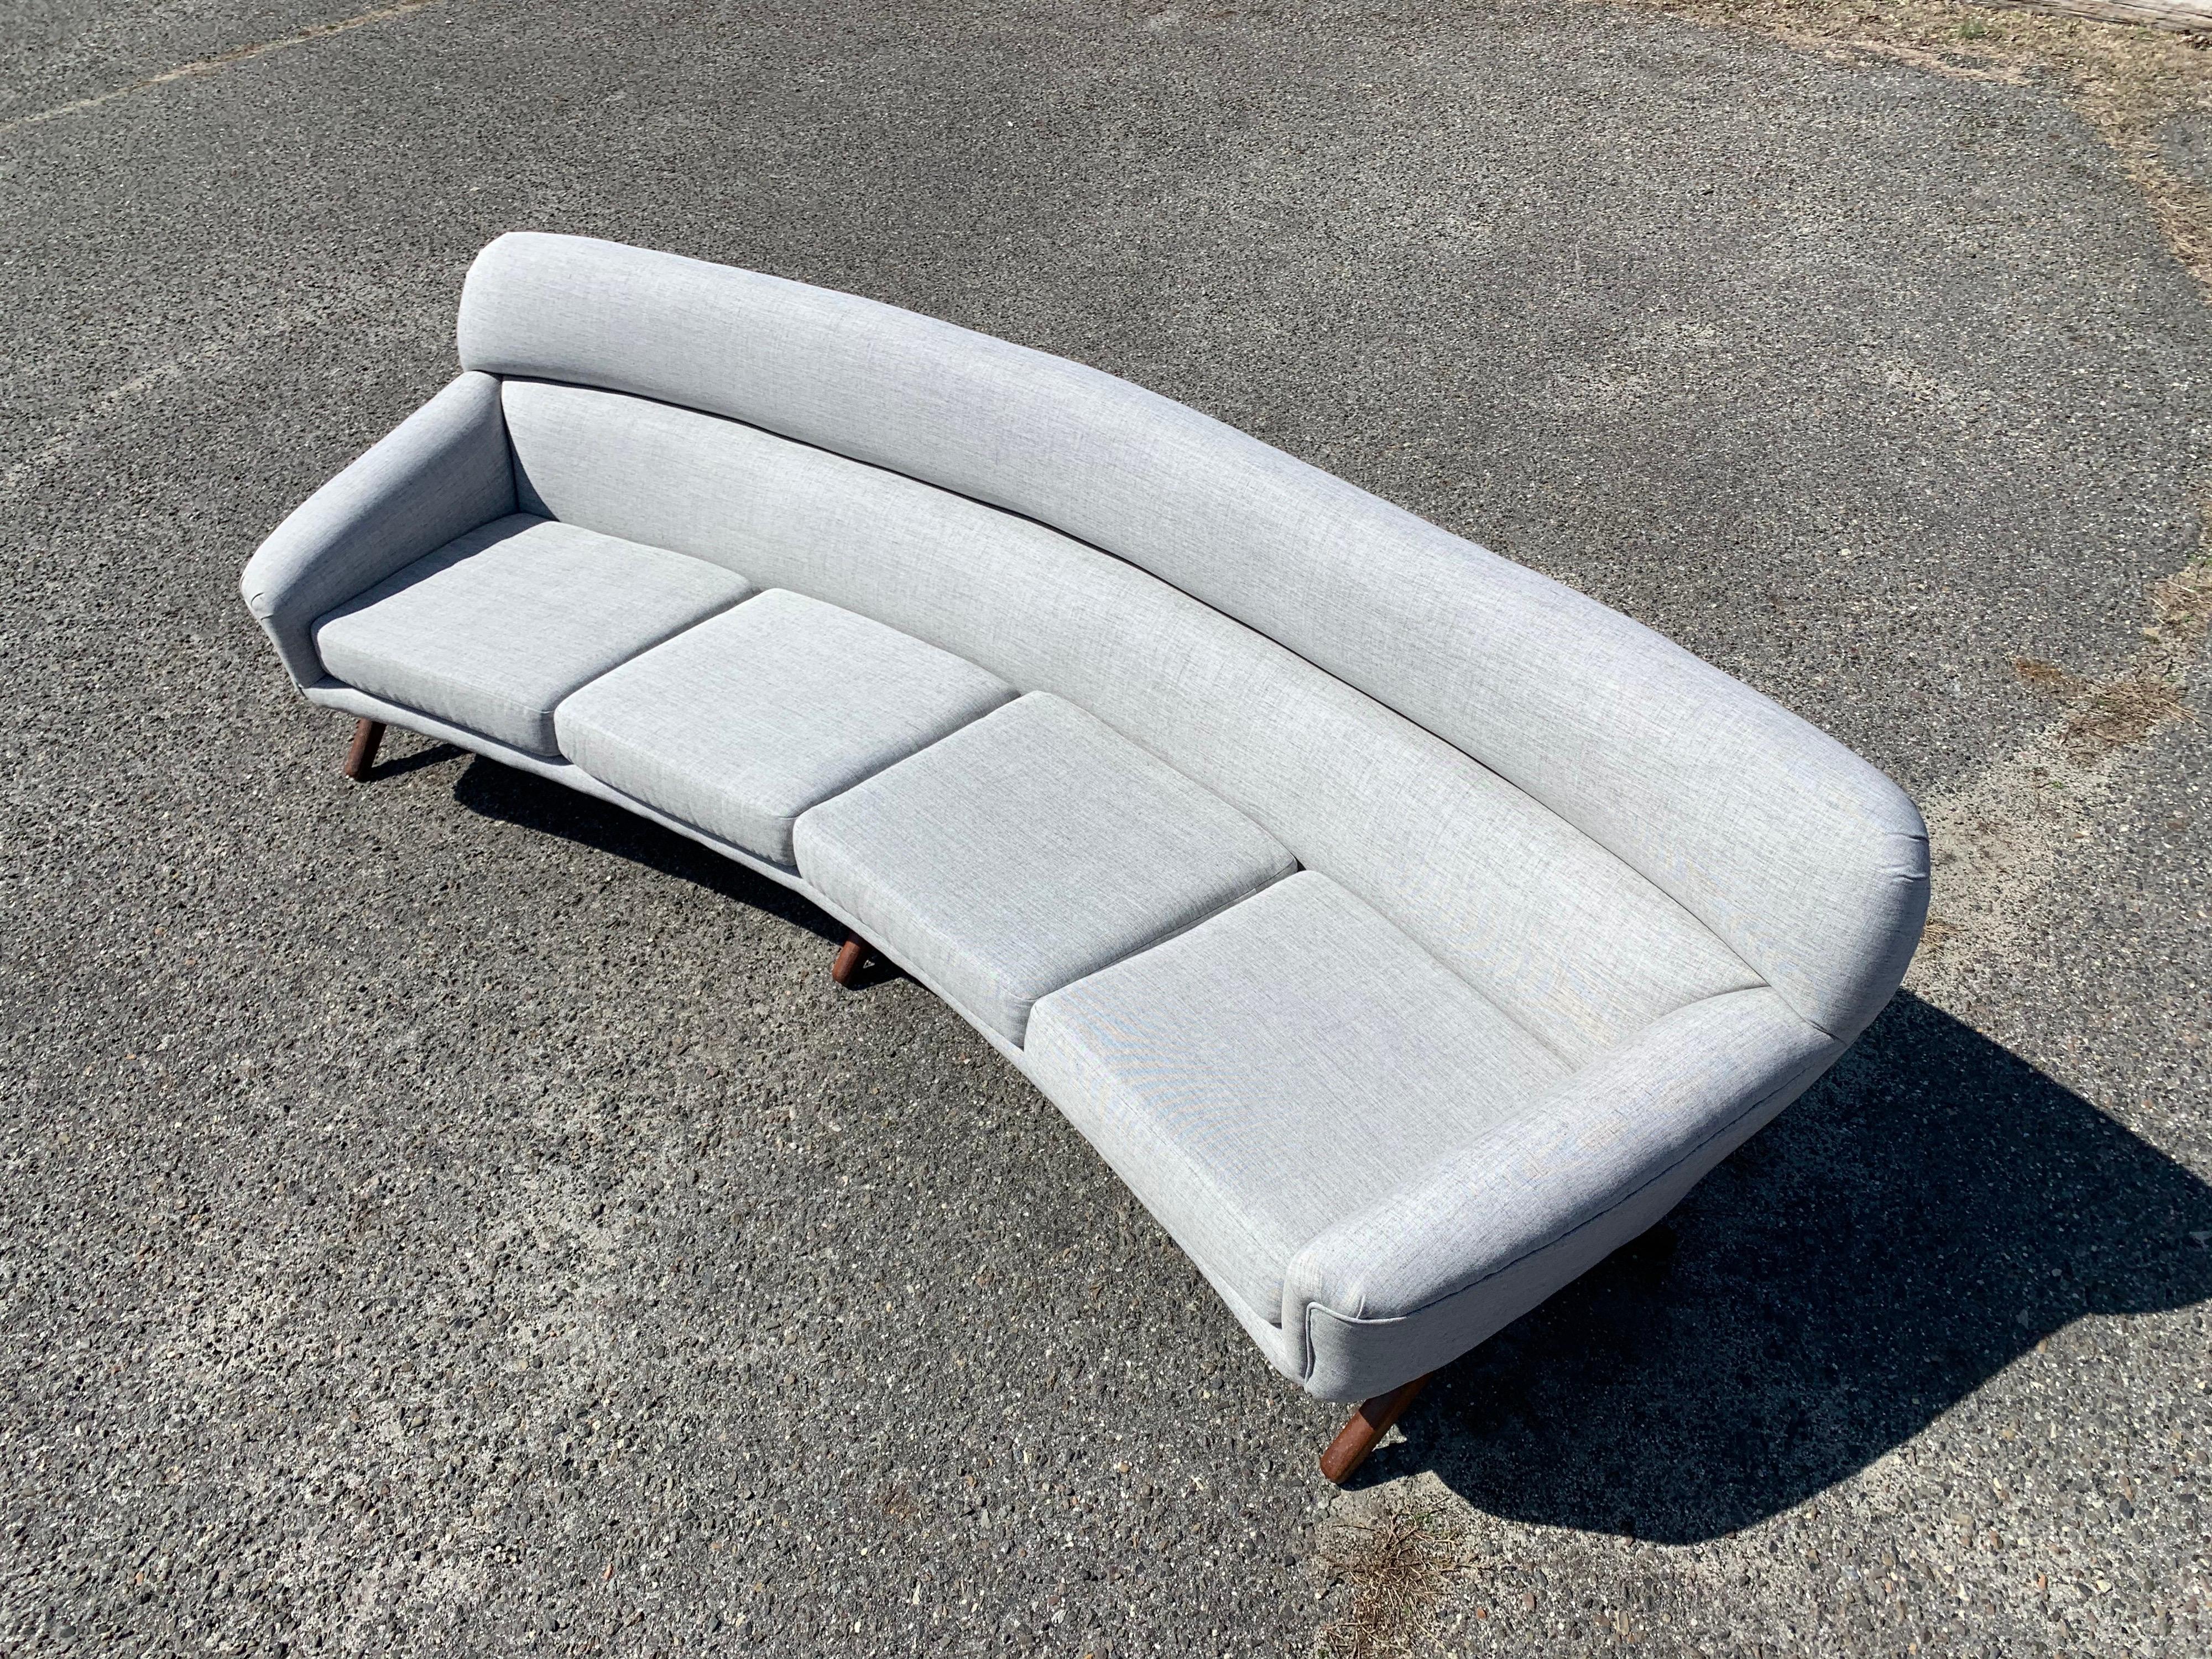 Illum Wikkelsø-Mikael Laursen 105” 4-seat sofa having 3 sets of teak legs.
Masterfully reupholstered as needed.
Outstanding overall condition.
Original receipt and letter of ownership are included.